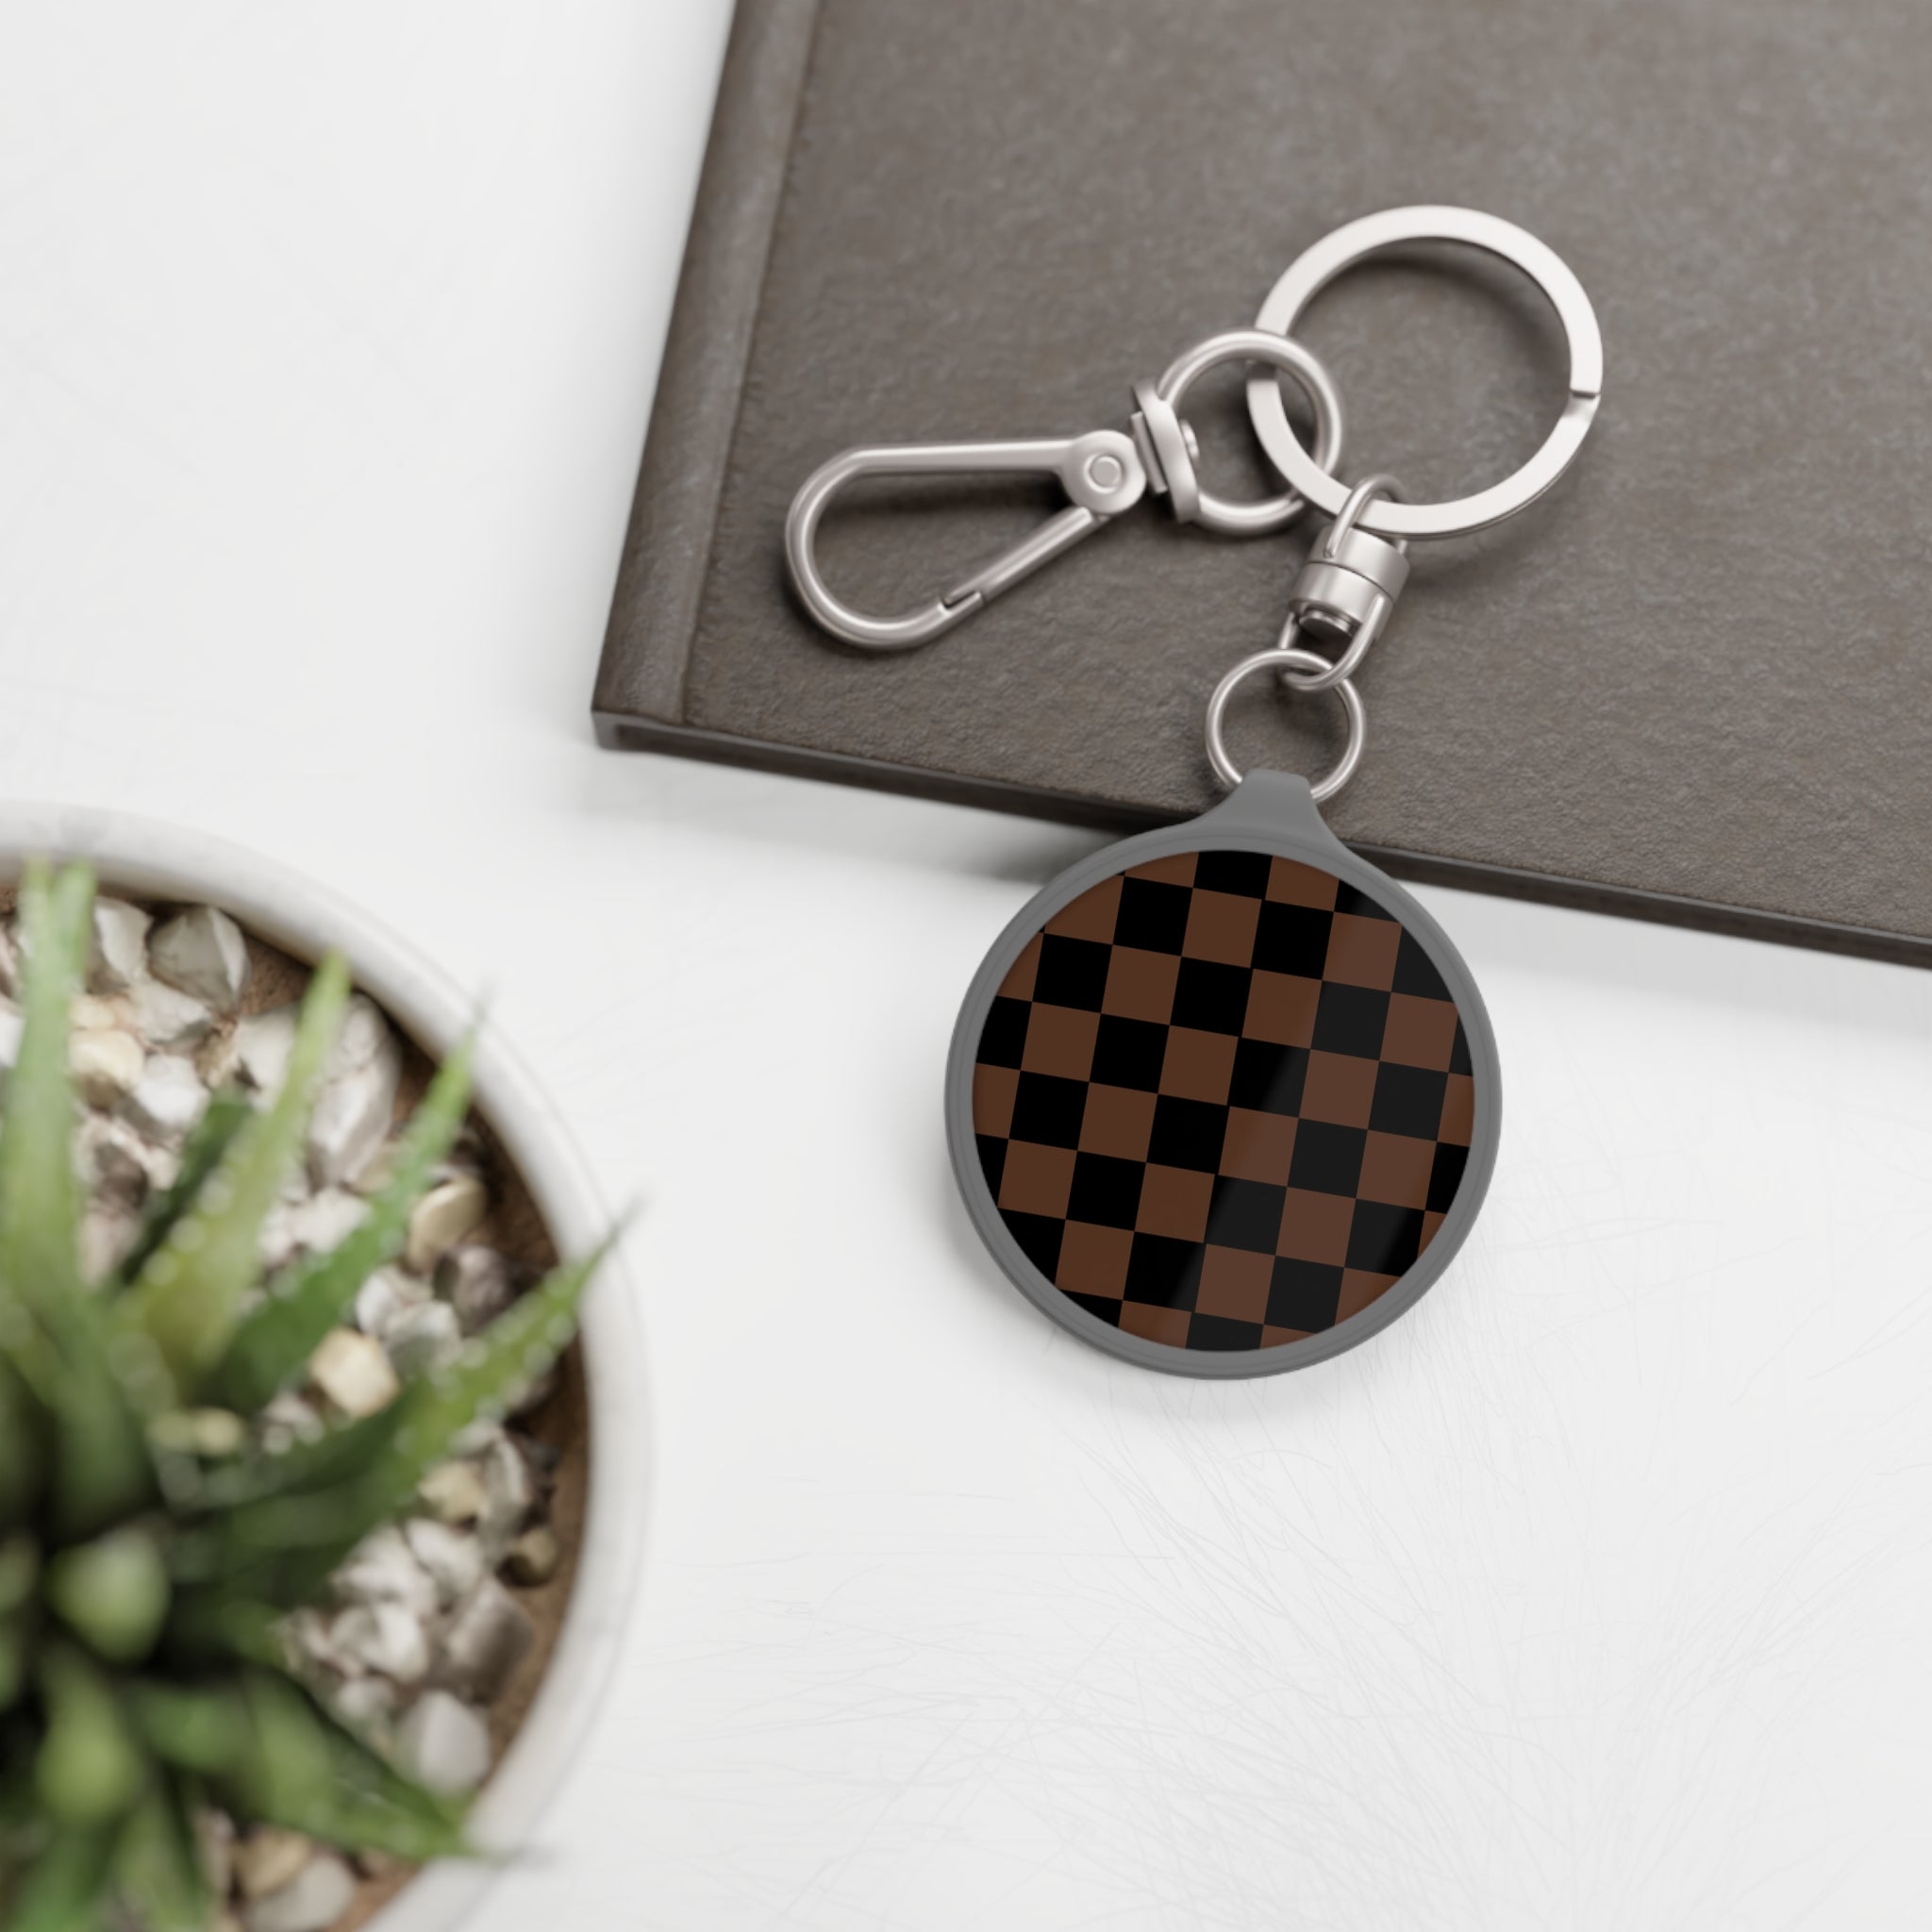 Groove Check Mate in Black and Brown Keyring Tag, Key Holder, Key Tag Organizer, Keyring Holder, Car Keychain Holder Accessories  The Middle Aged Groove